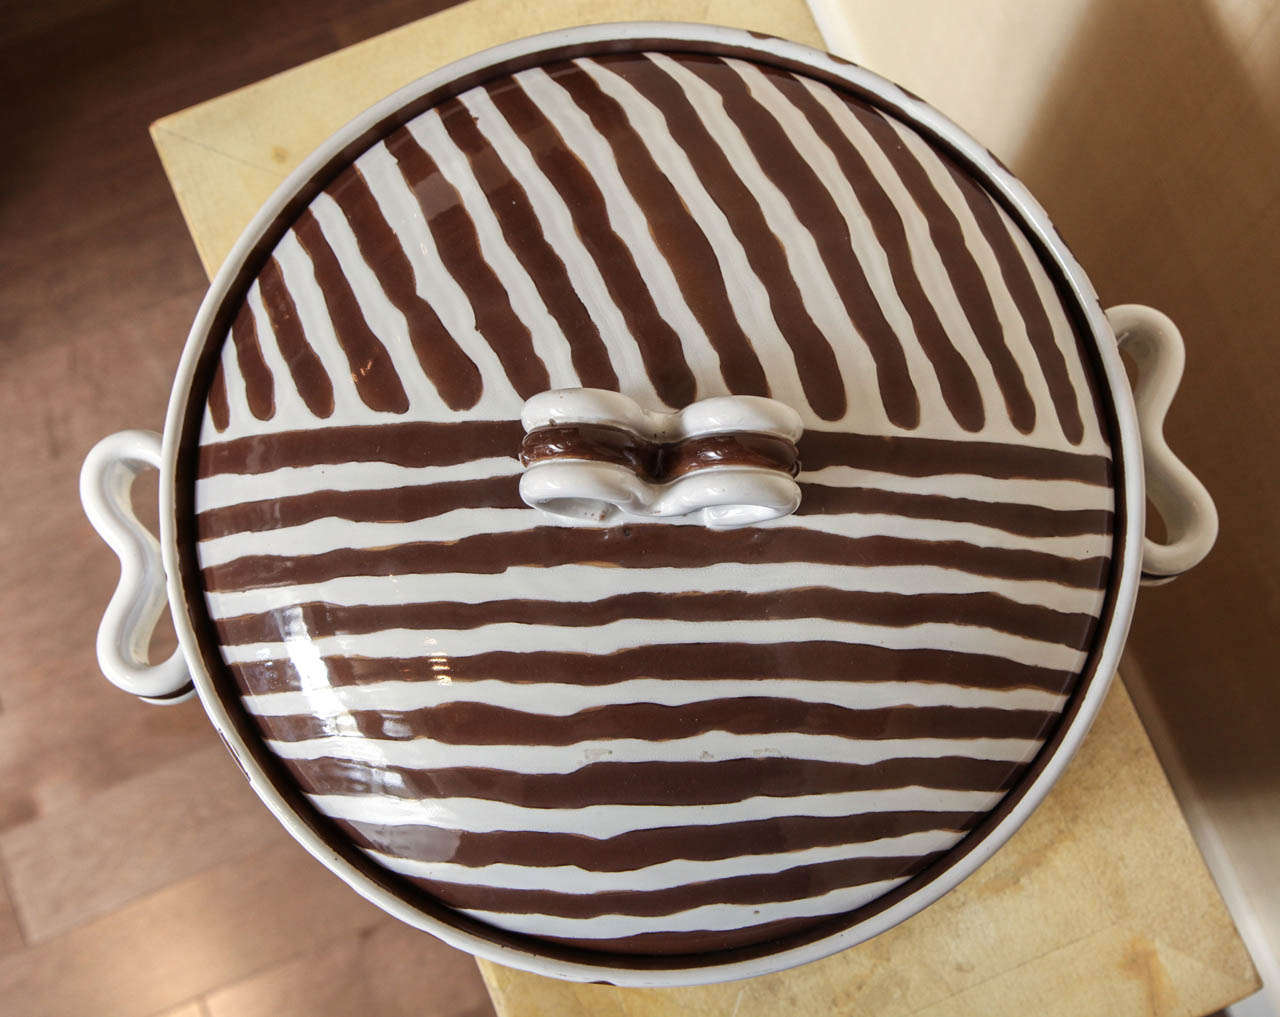 Brown and White Striped Dish with Lid by Zaccagnini Italy, circa 1954 For Sale 3